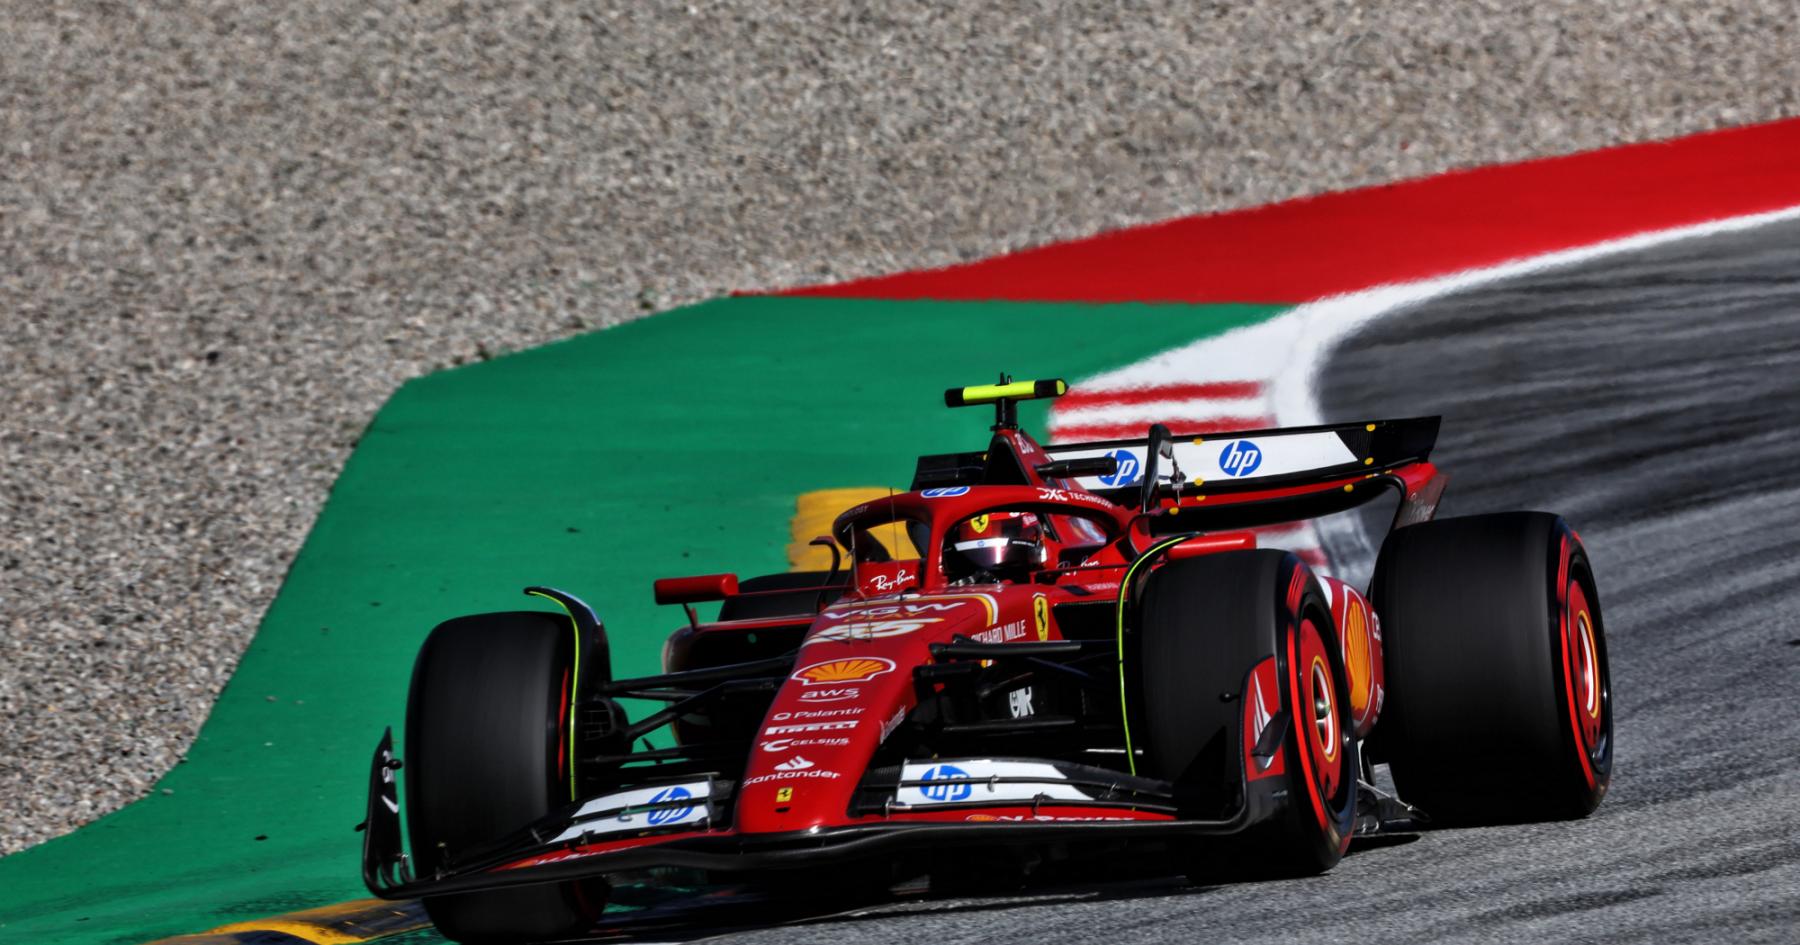 Revving up for Victory: Ferrari's High-Speed Upgrades to Challenge Red Bull